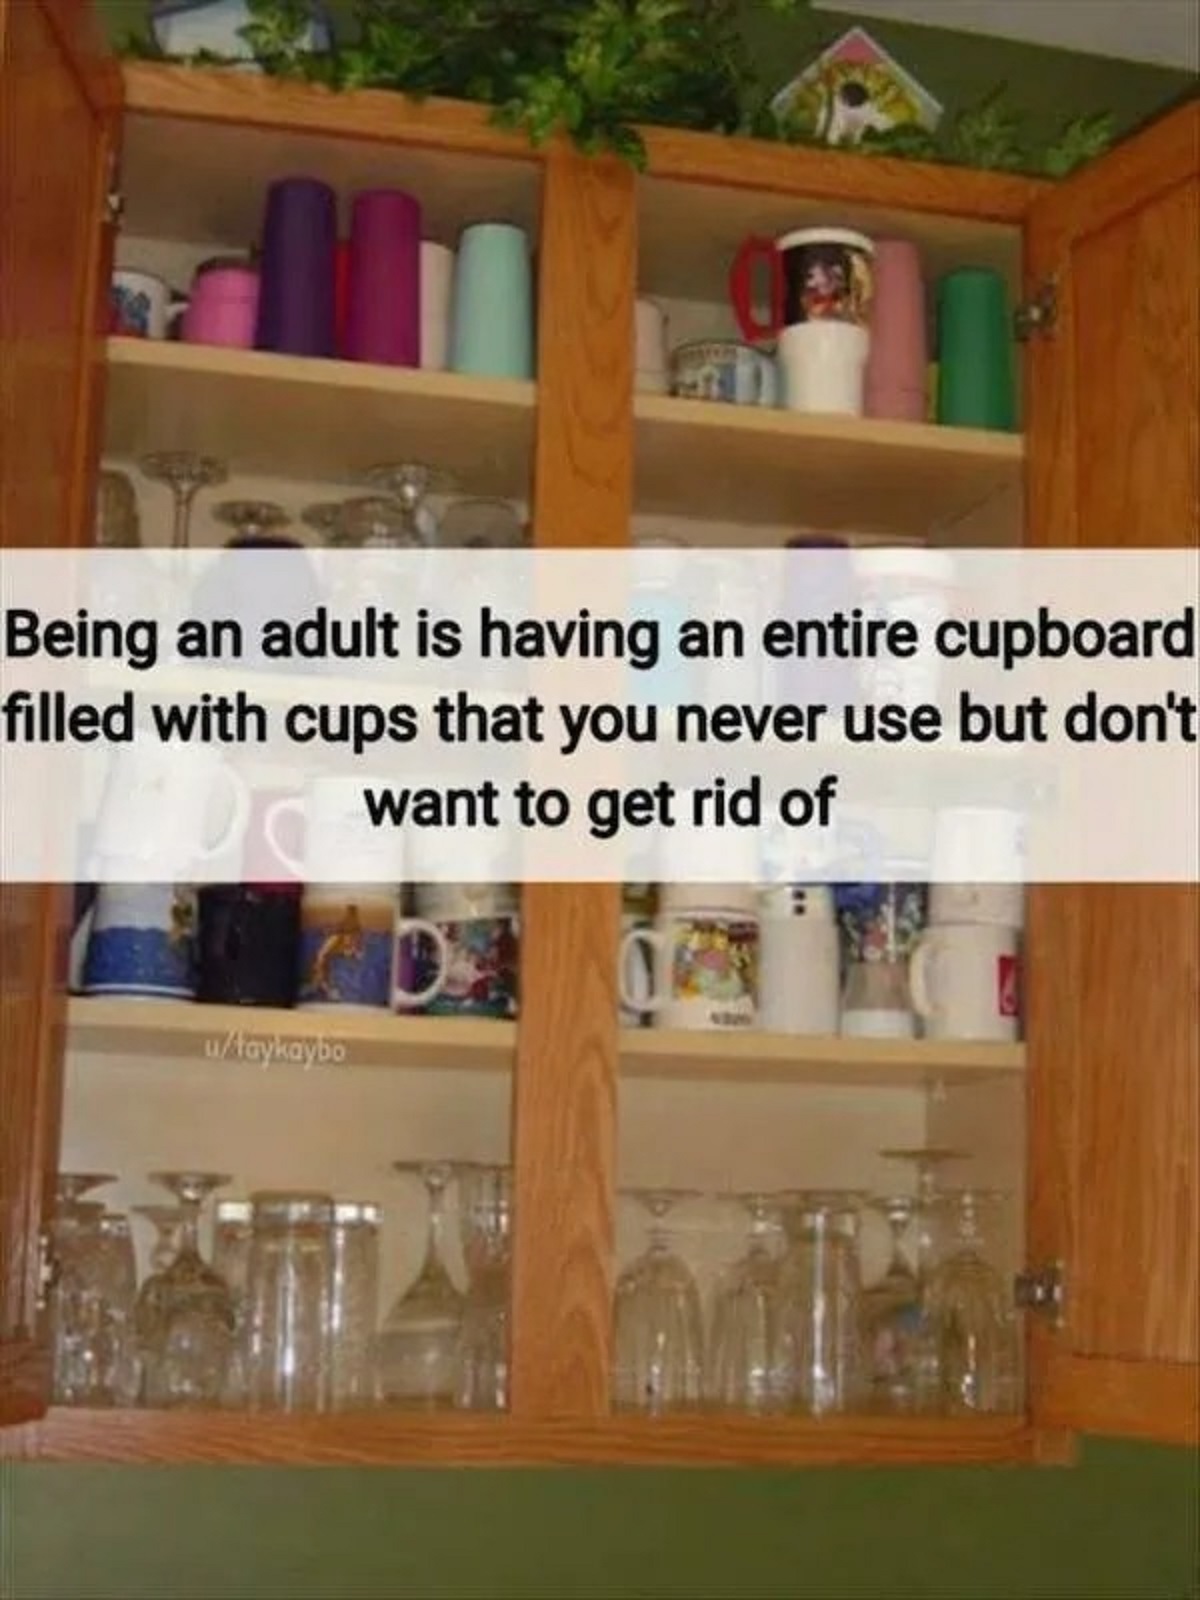 iFunny - Being an adult is having an entire cupboard filled with cups that you never use but don't want to get rid of utaykaybo